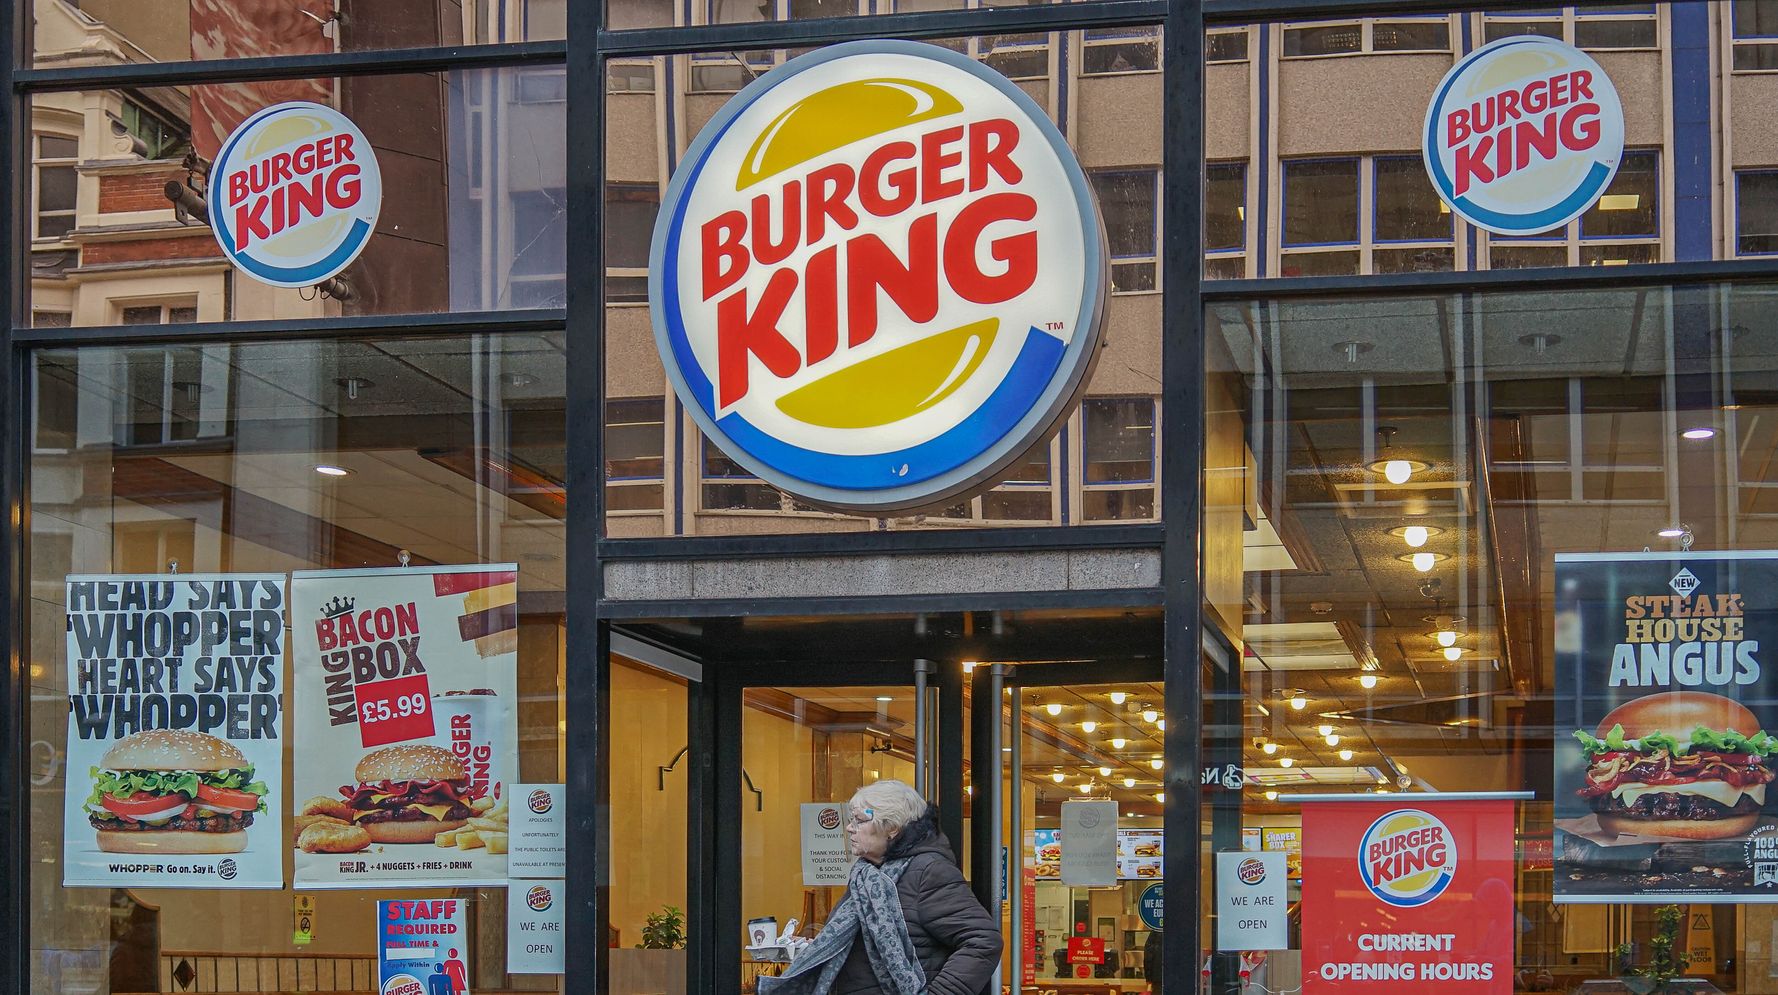 Burger King apologizes after riot for “Women belong to the kitchen” Tweet